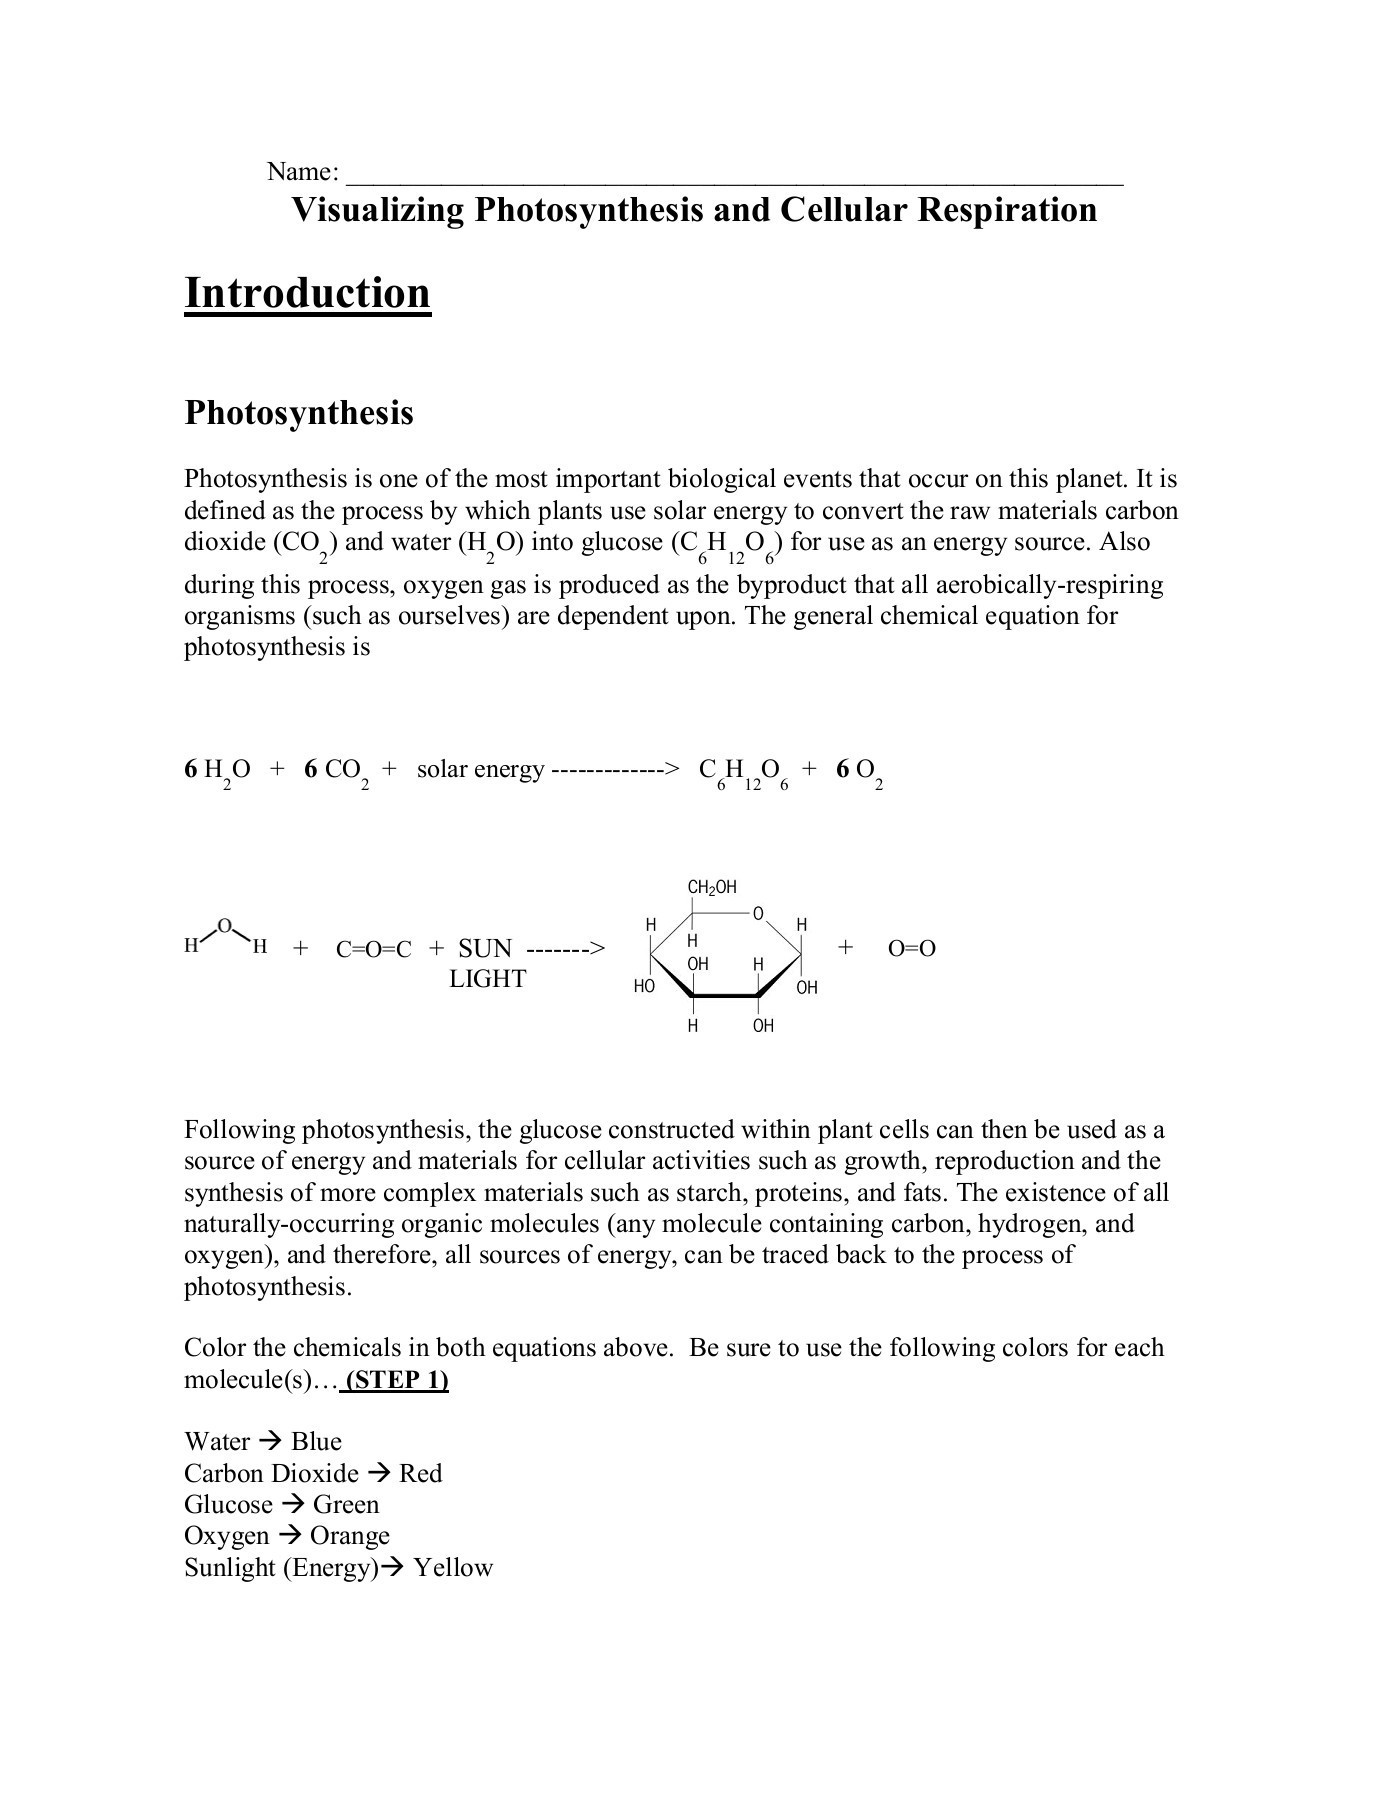 Photosynthesis and Respiration Worksheet Answers Name Synthesis and Cellular